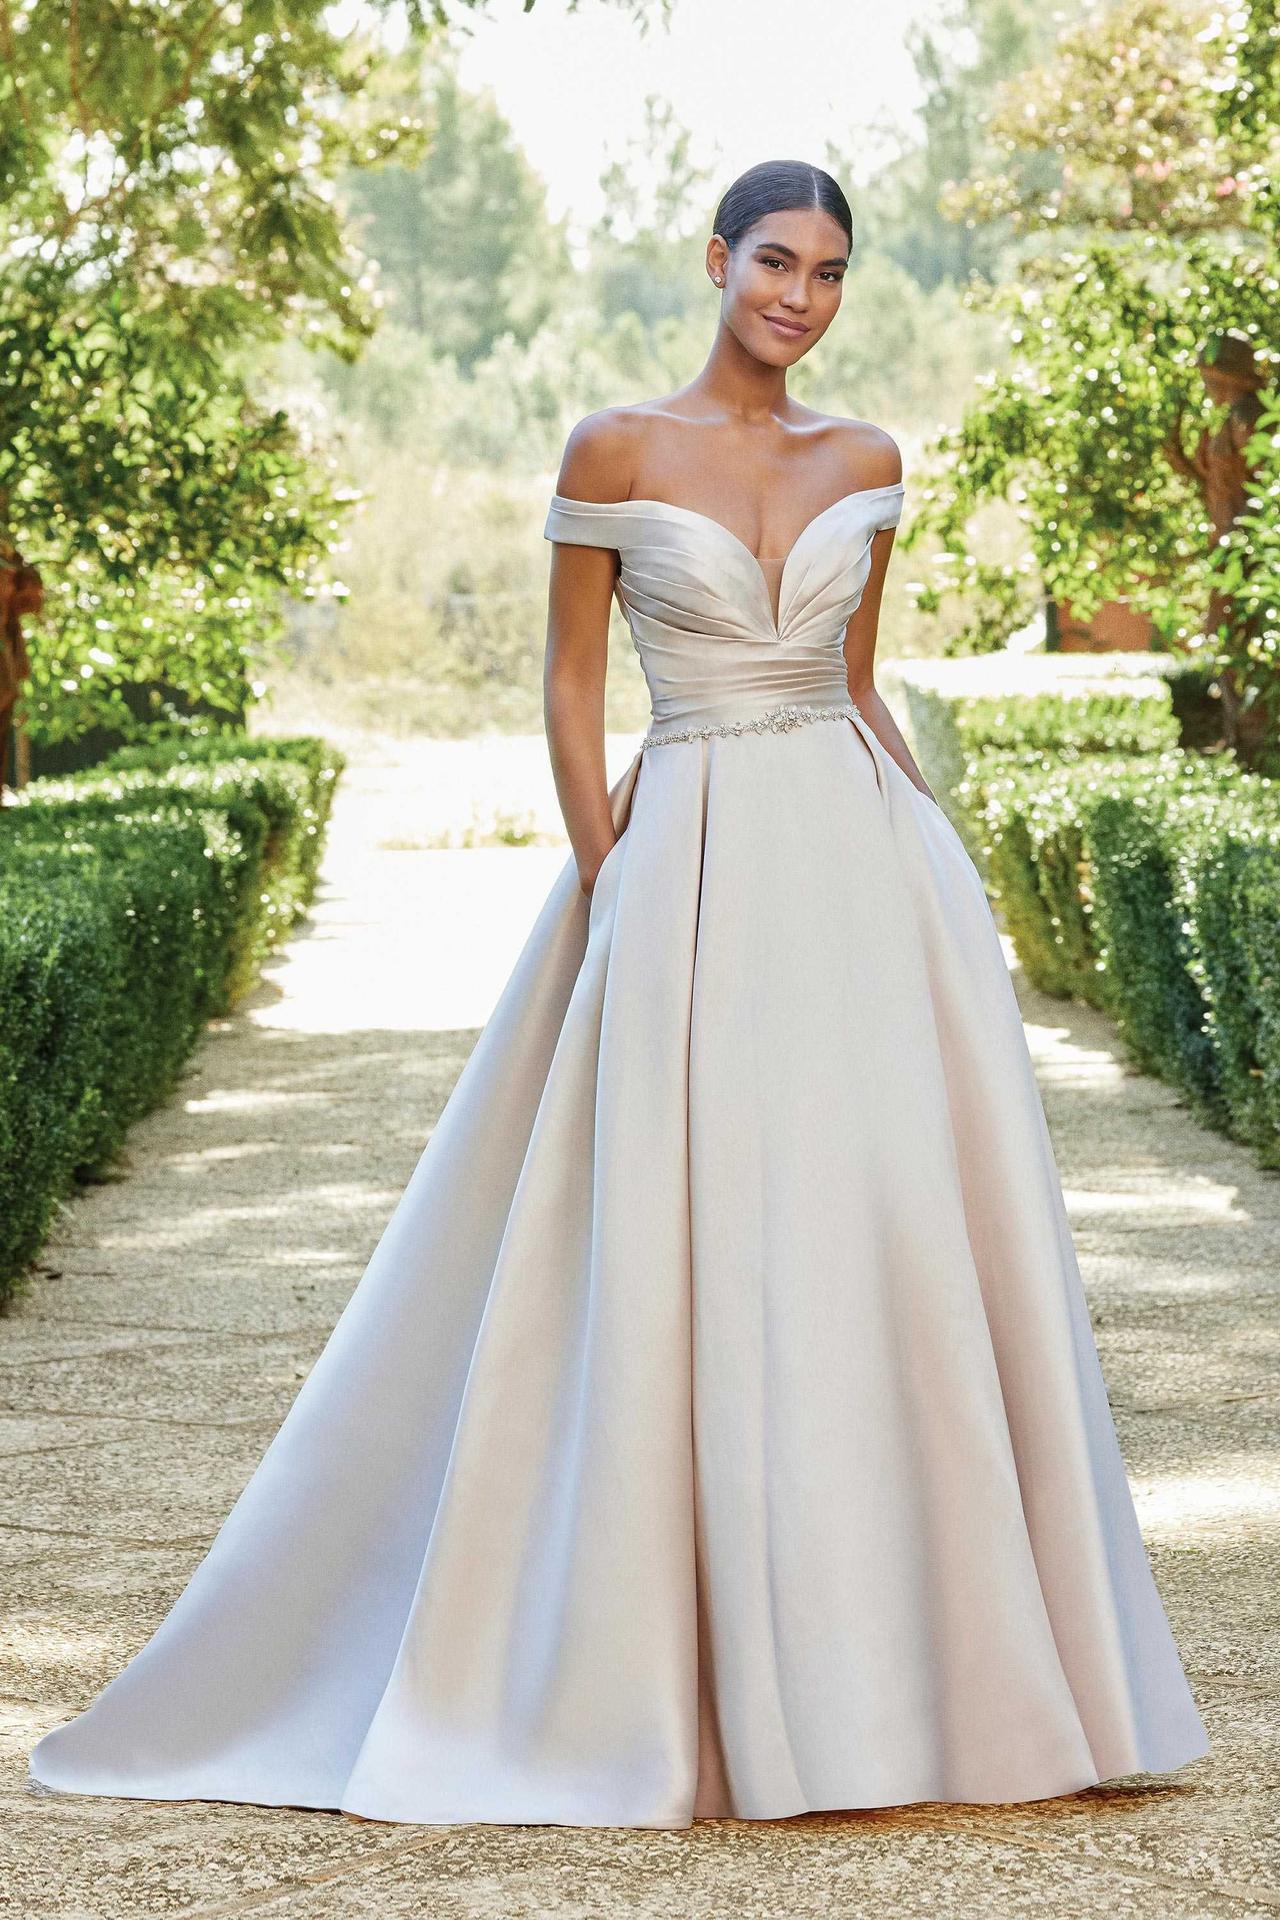 wedding dresses with pockets: 24 chic styles - hitched.co.uk